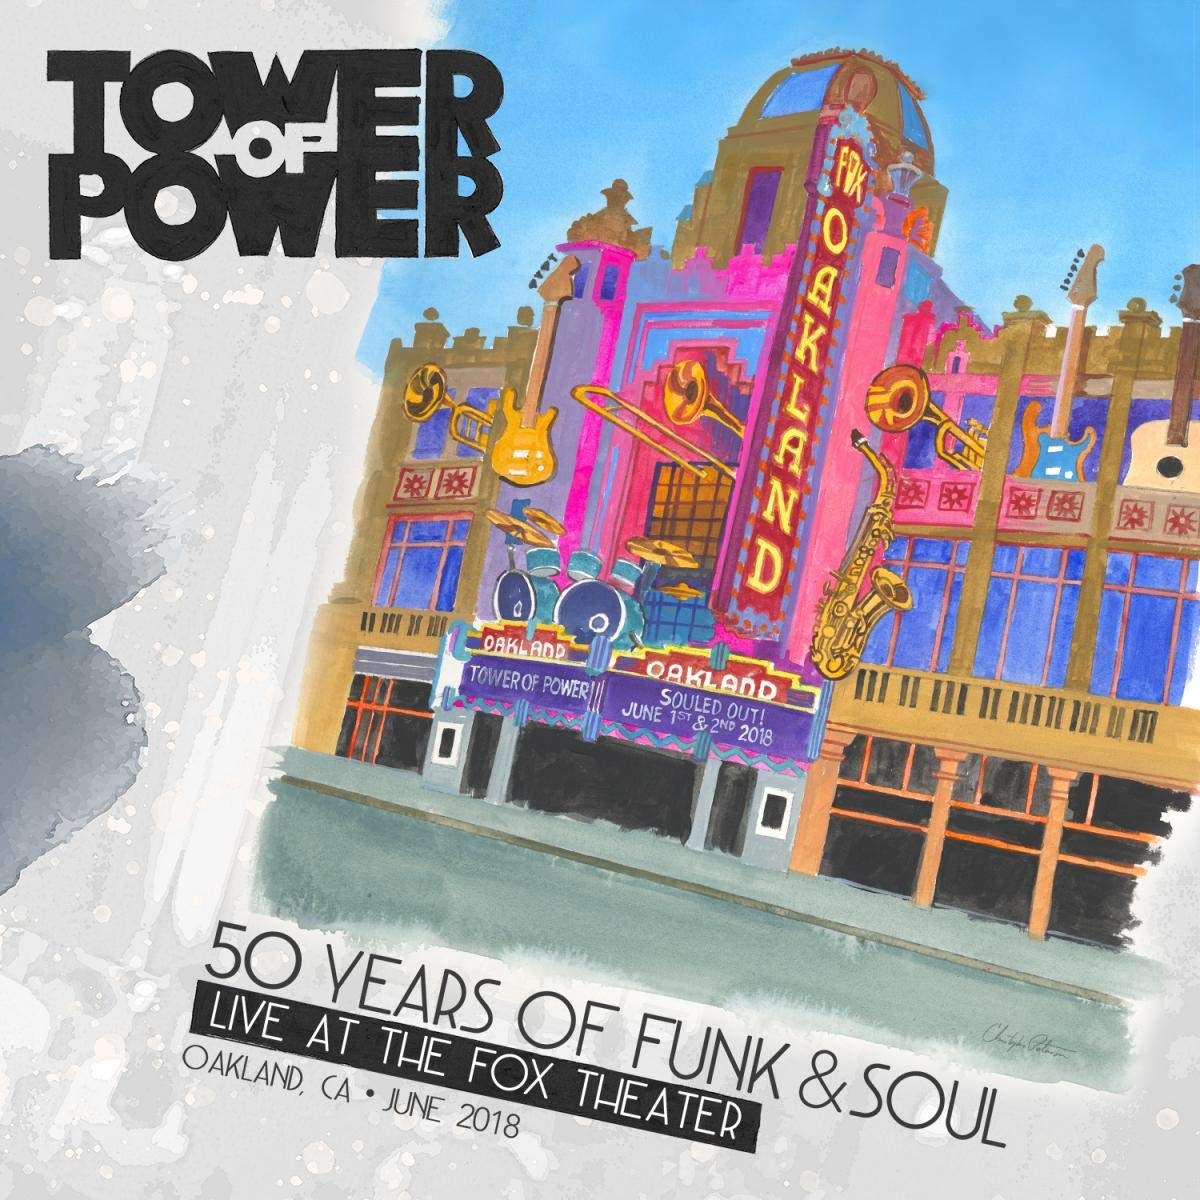 Tower Of Power 50 Years Of Funck & Soul: Live At The Fox Theater - Oakland, CA - June 2018 CD